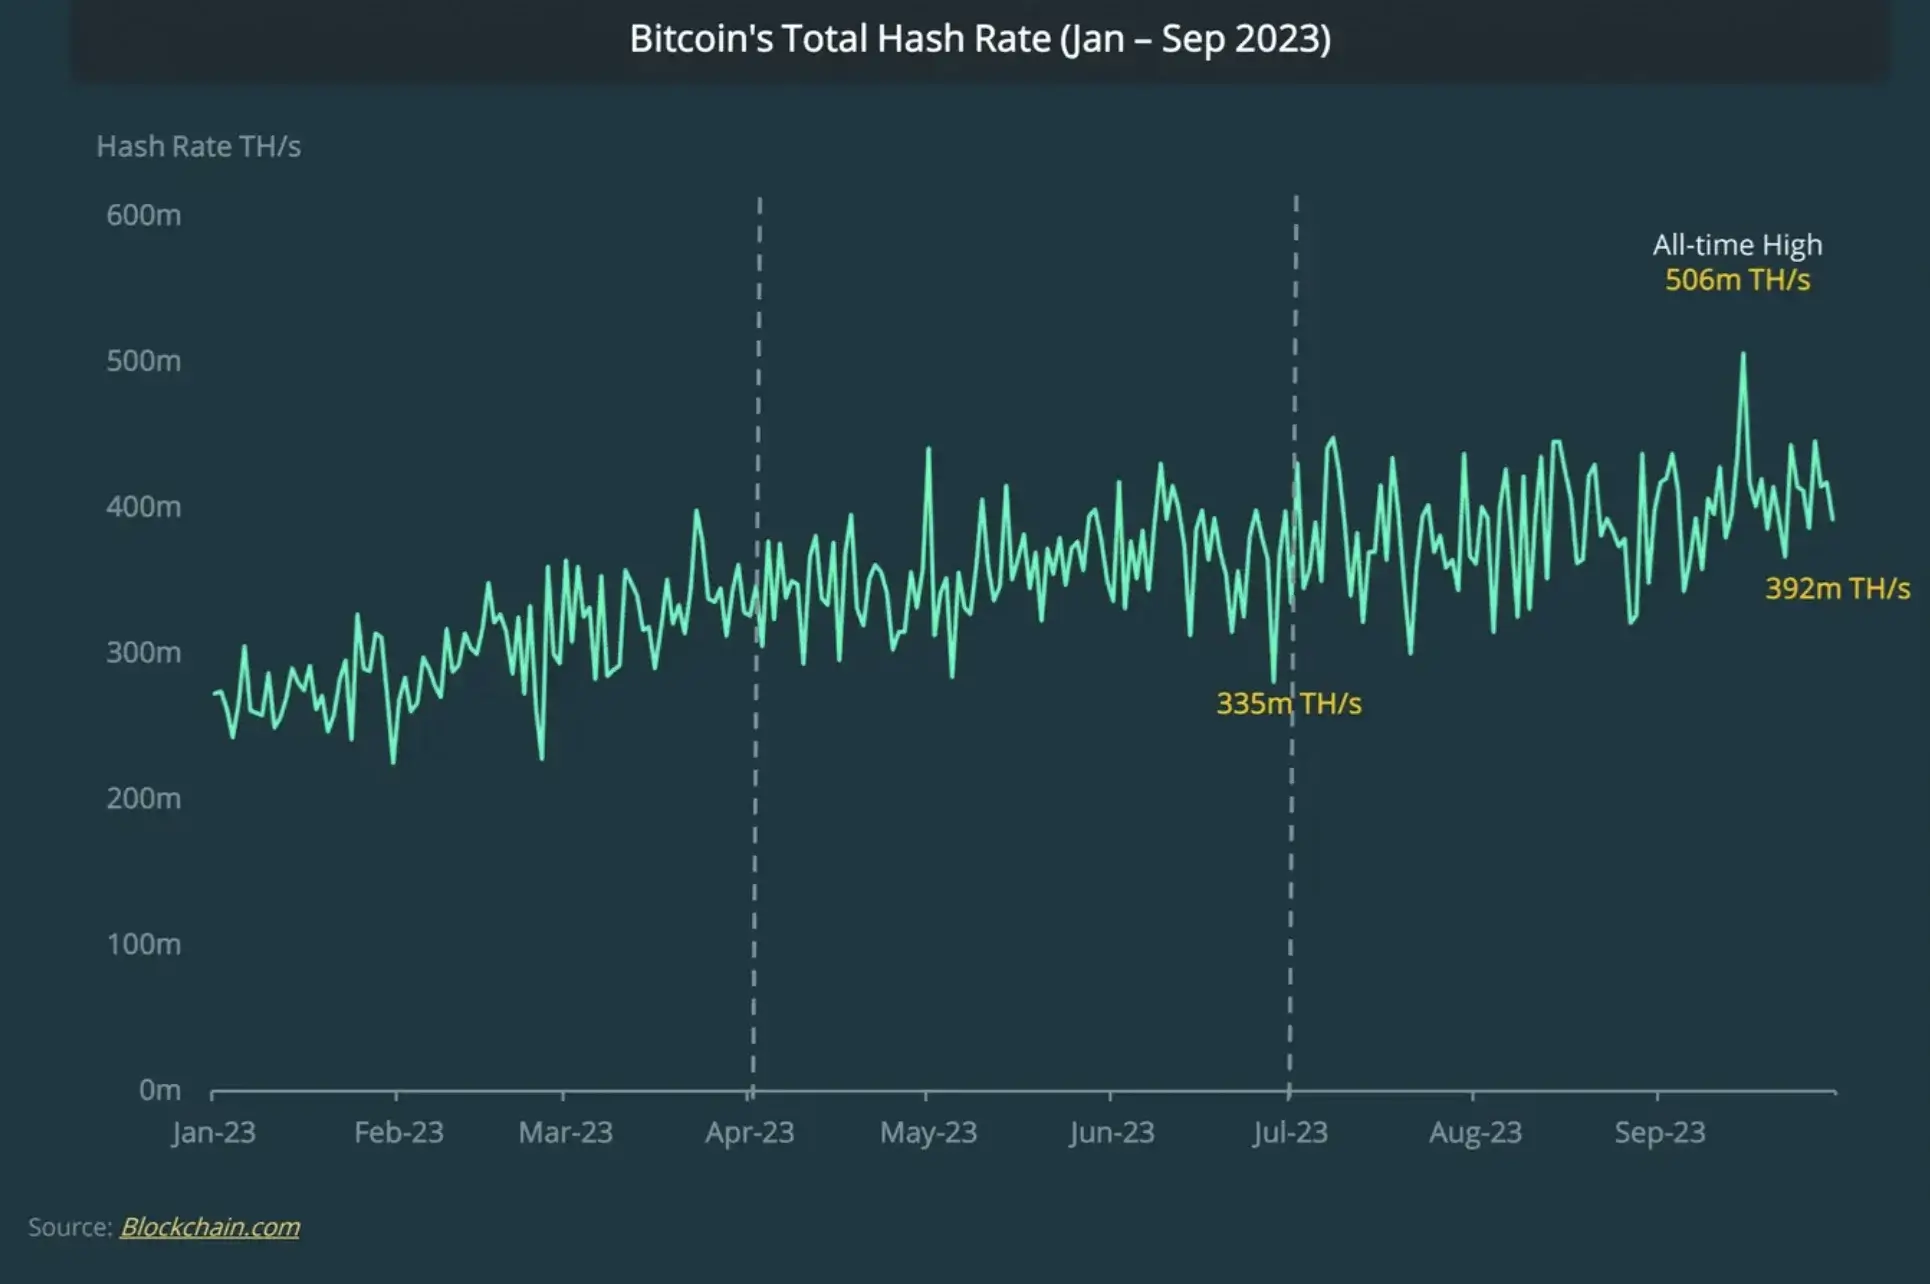 Bitcoin Hash Rate in Q3 2023